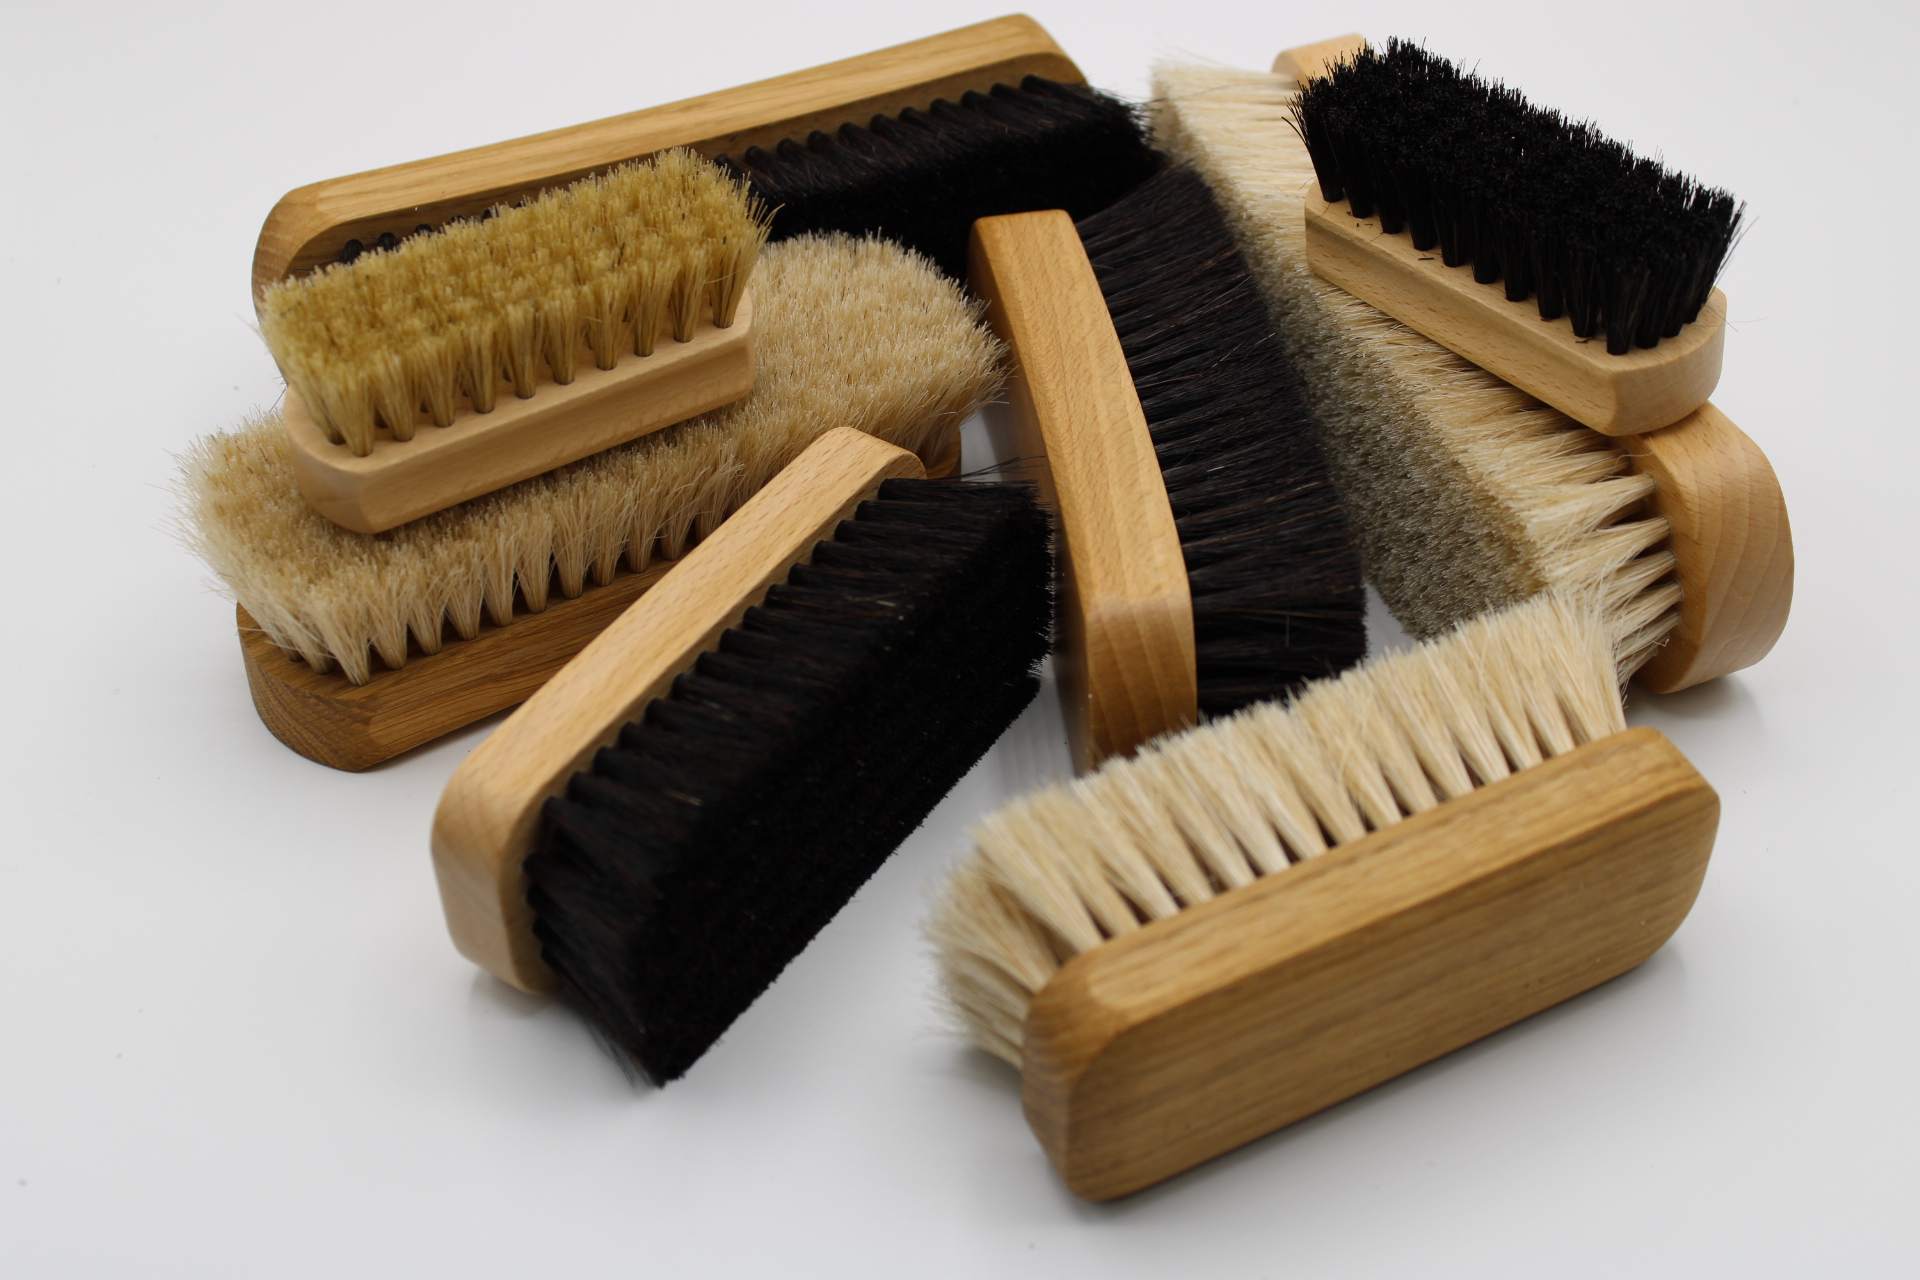 federation-francaise-brosserie-categorie-brosses-maquillage-hygiene-coiffure